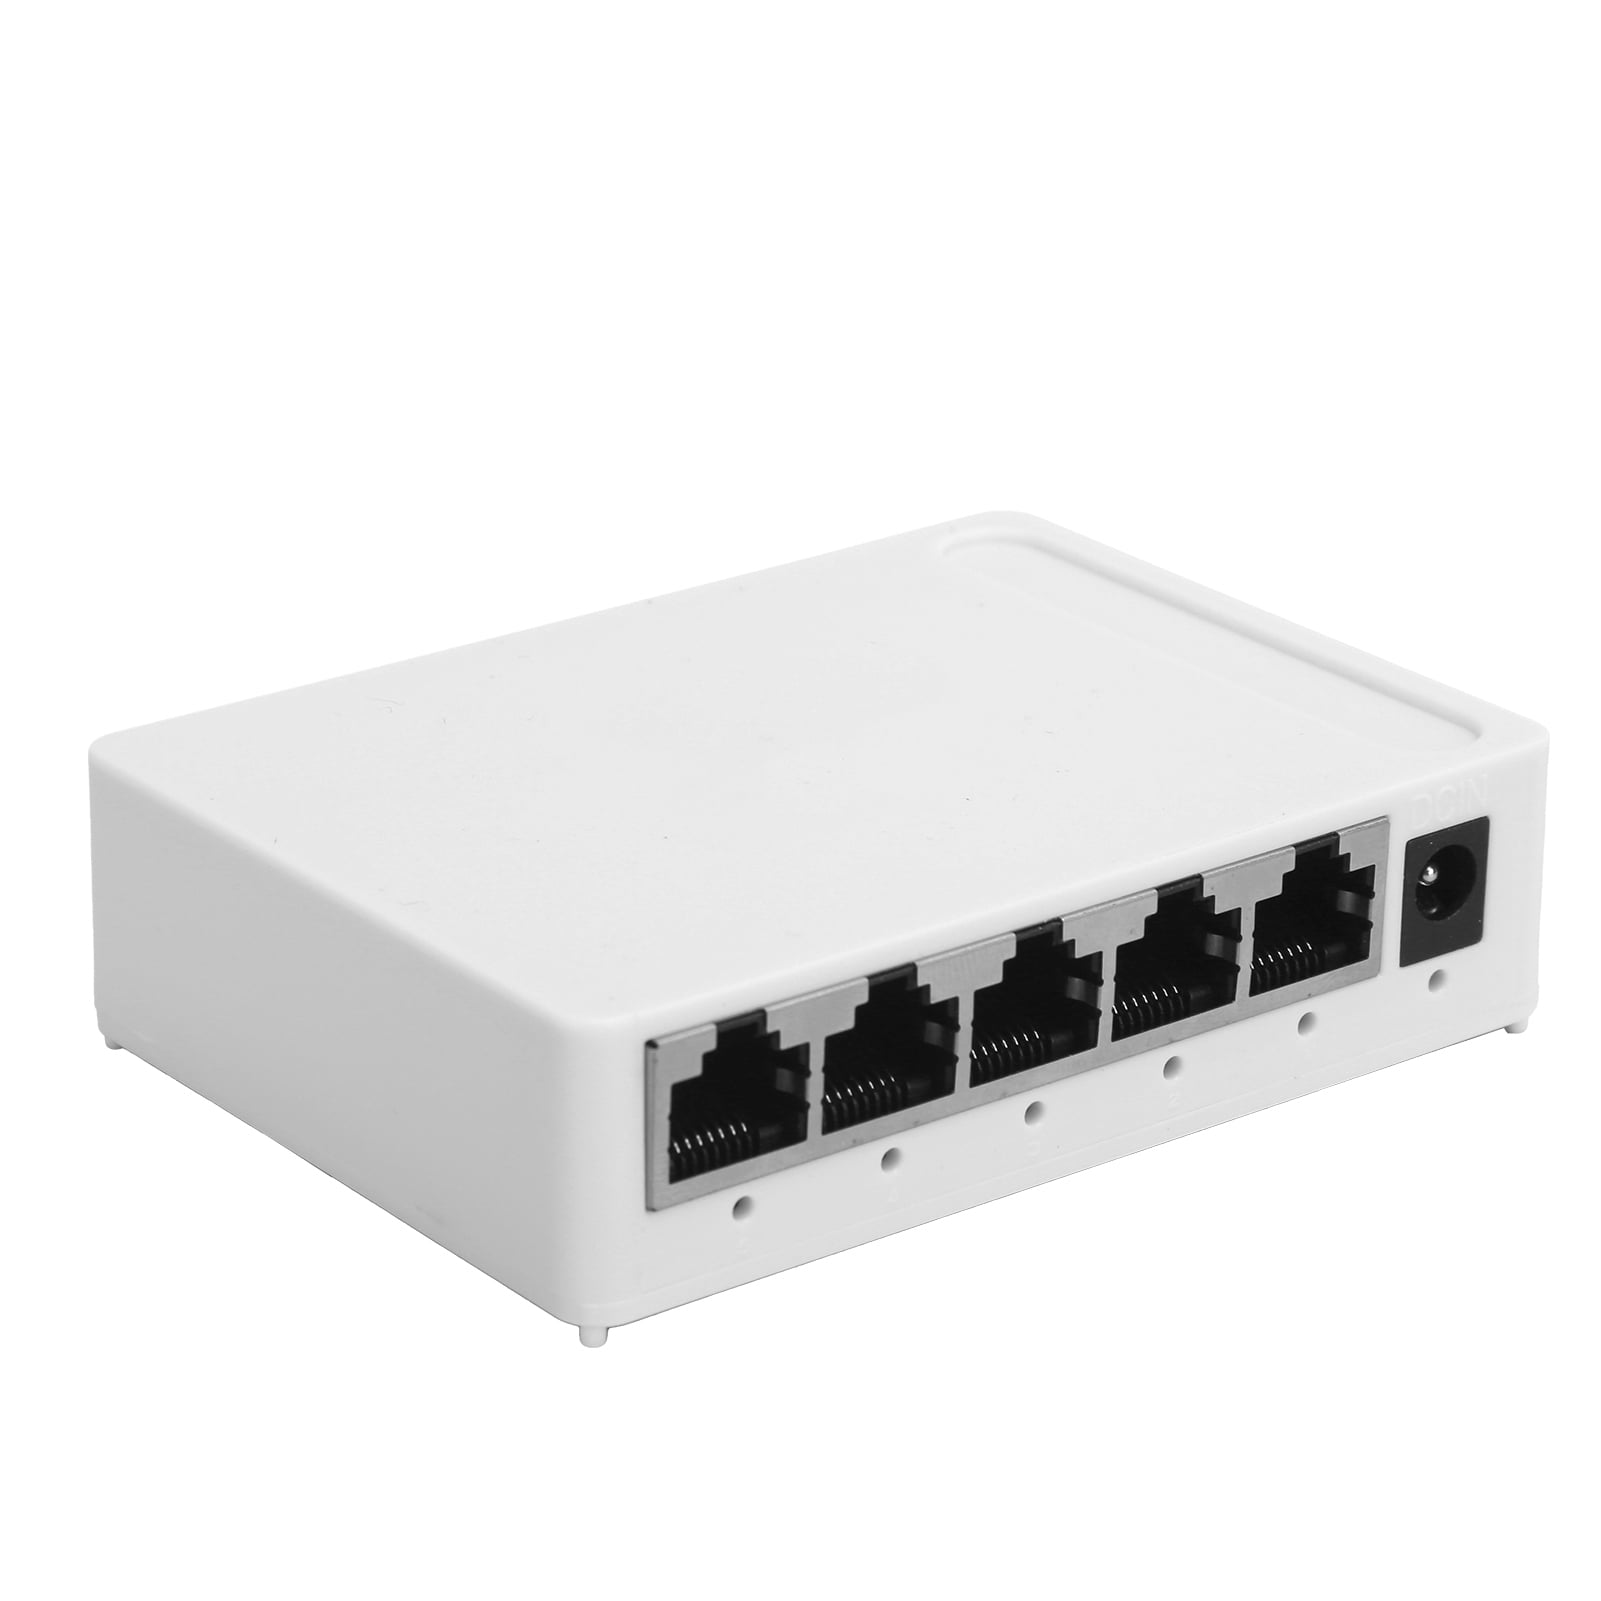 smc networks router ezswitch